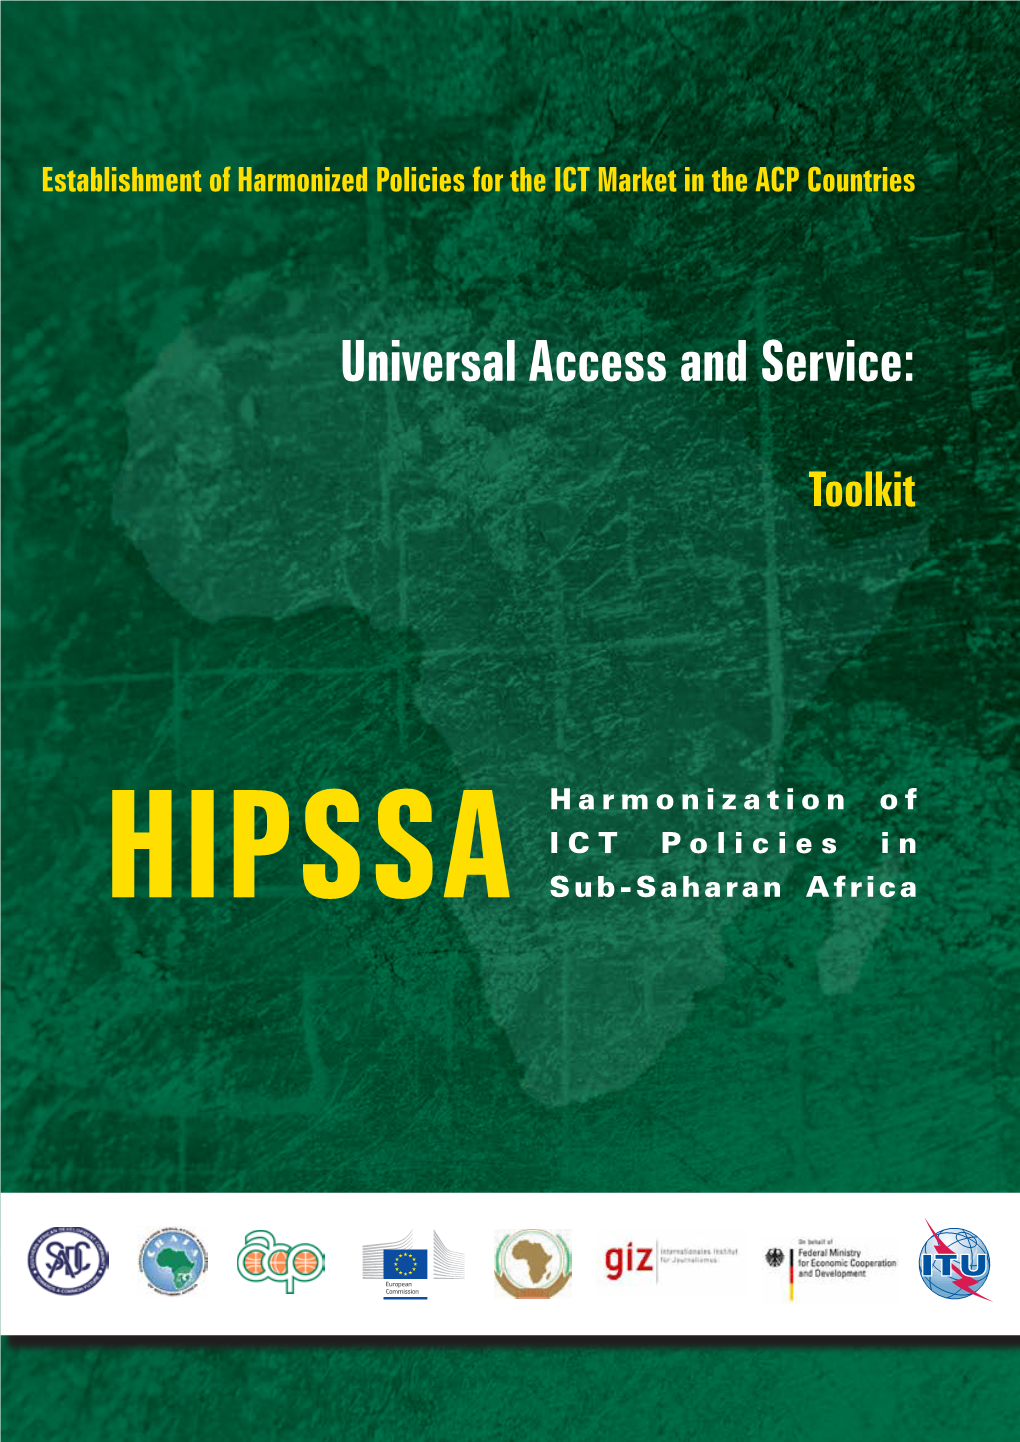 Universal Service and Access: Toolkit